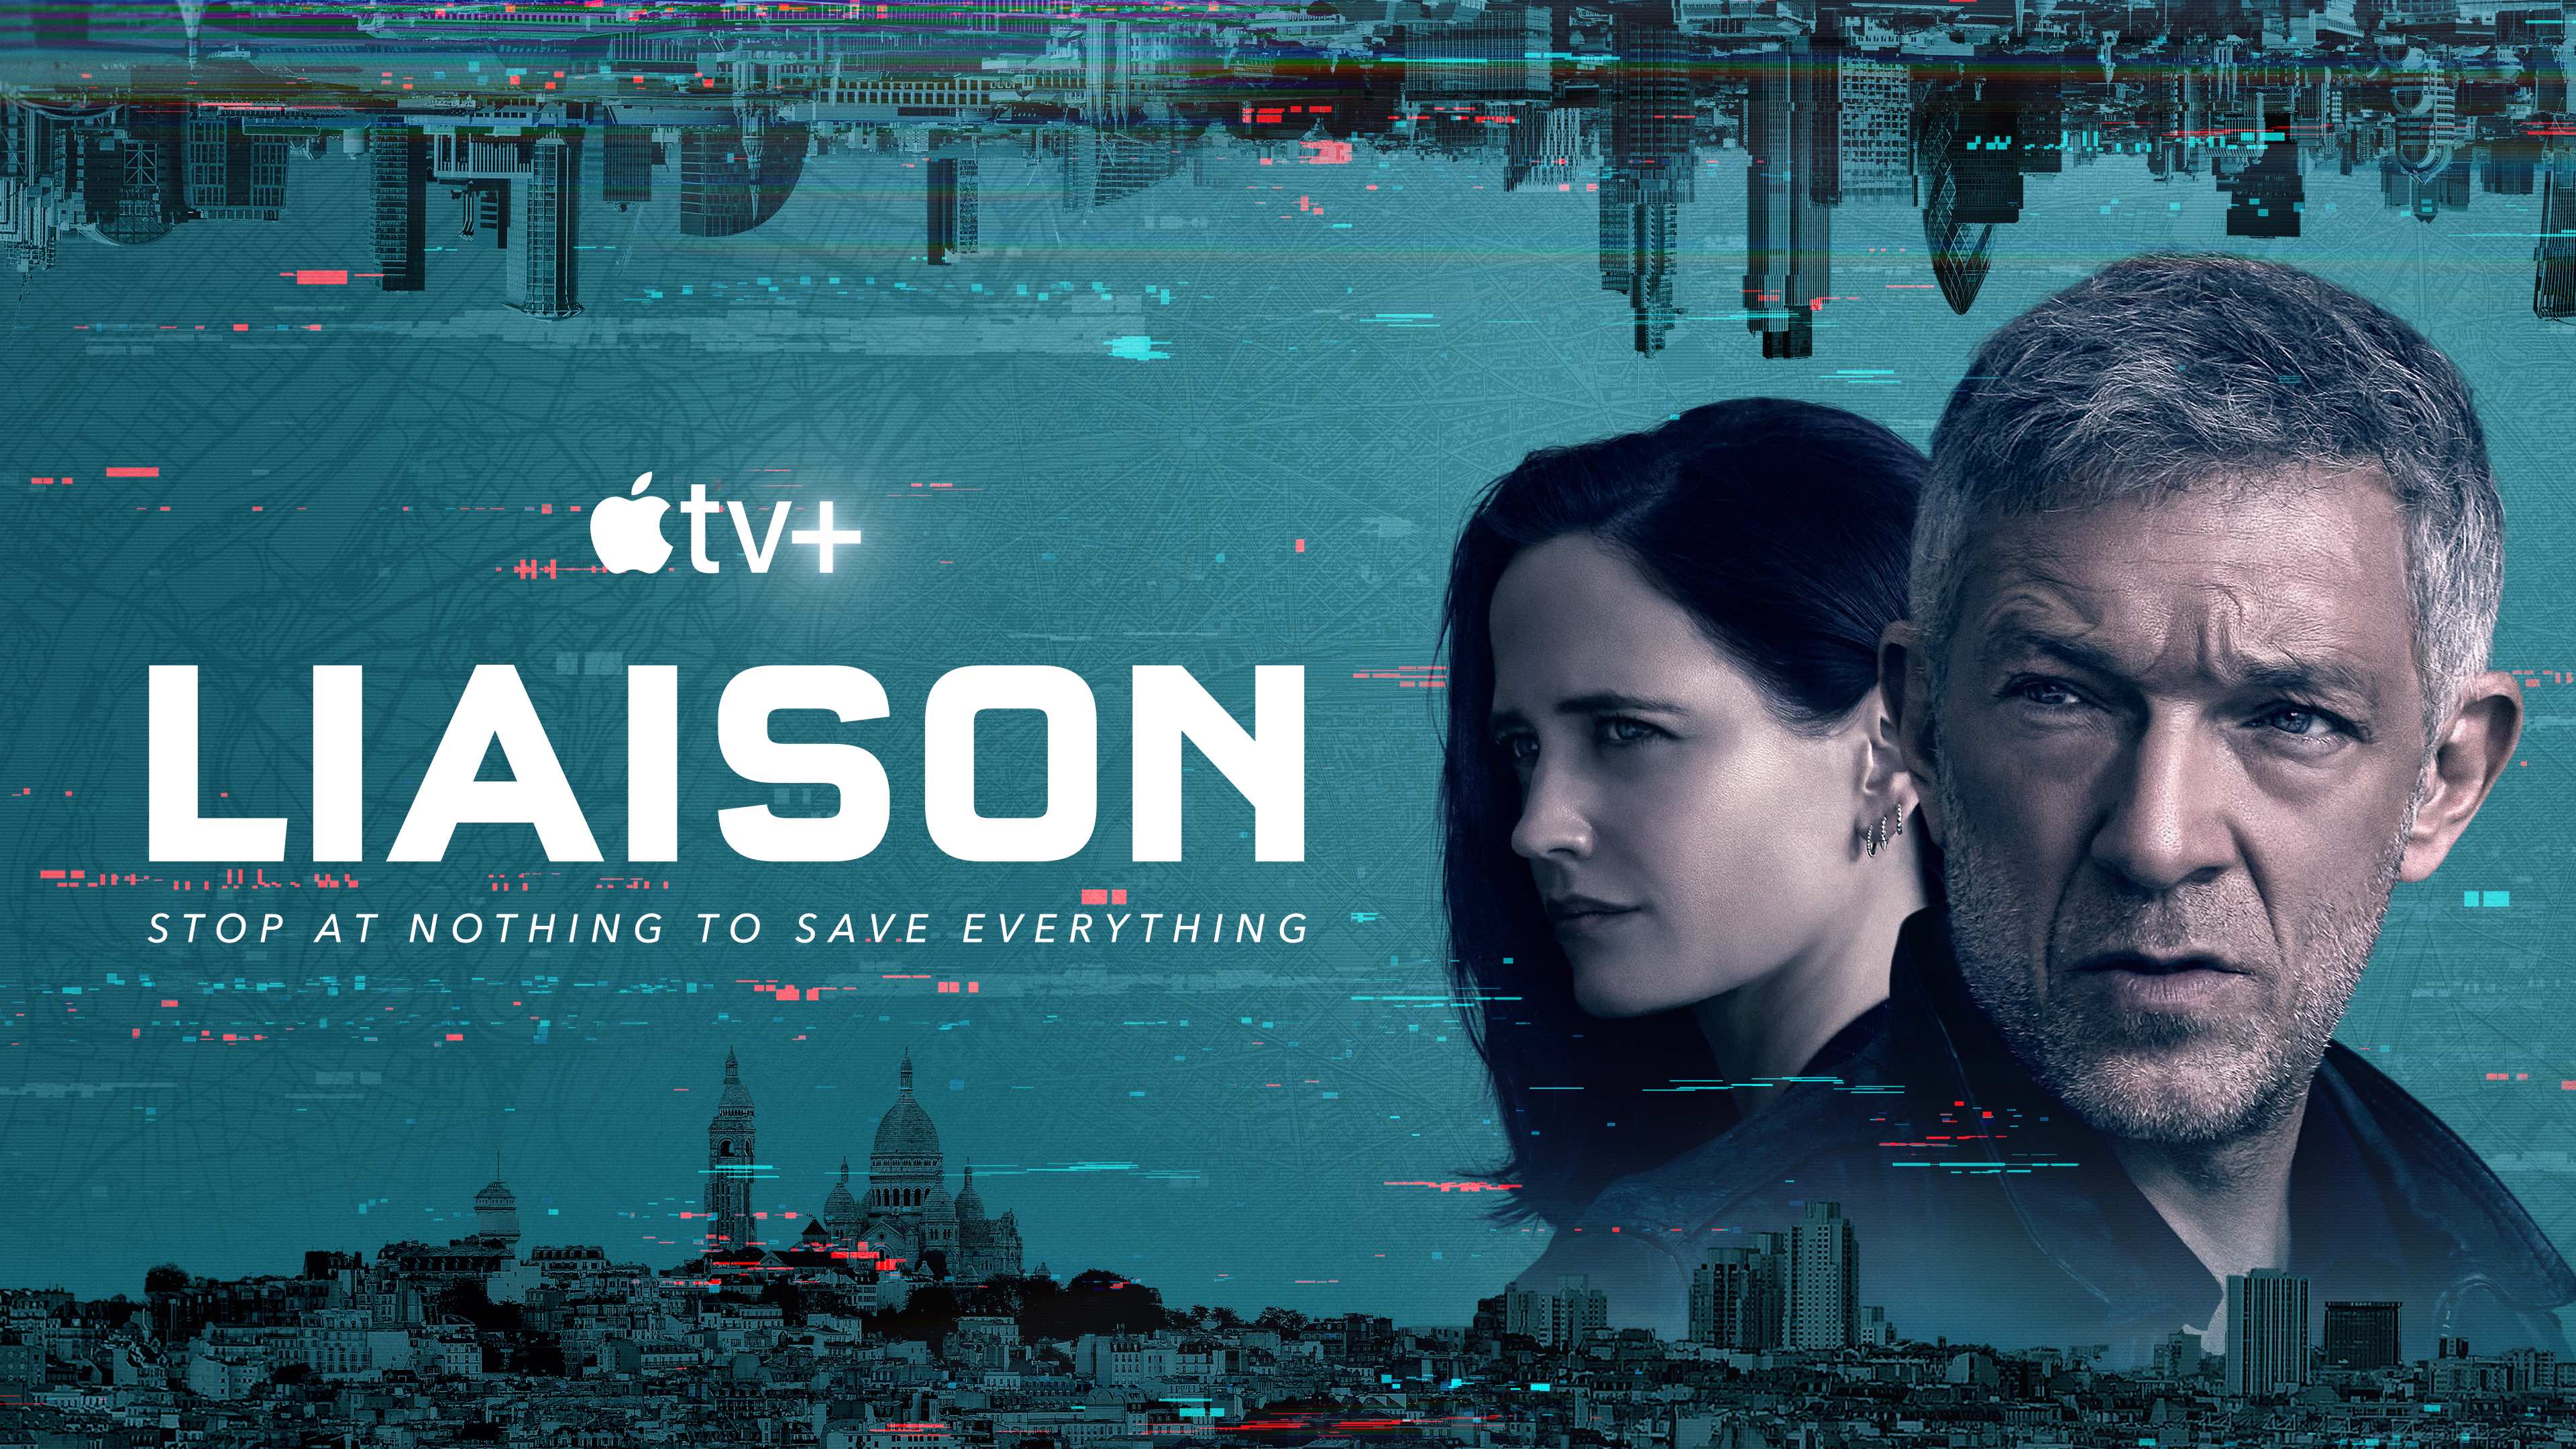 Liaison Cast - Every Actor and Character in the Apple TV+ Series